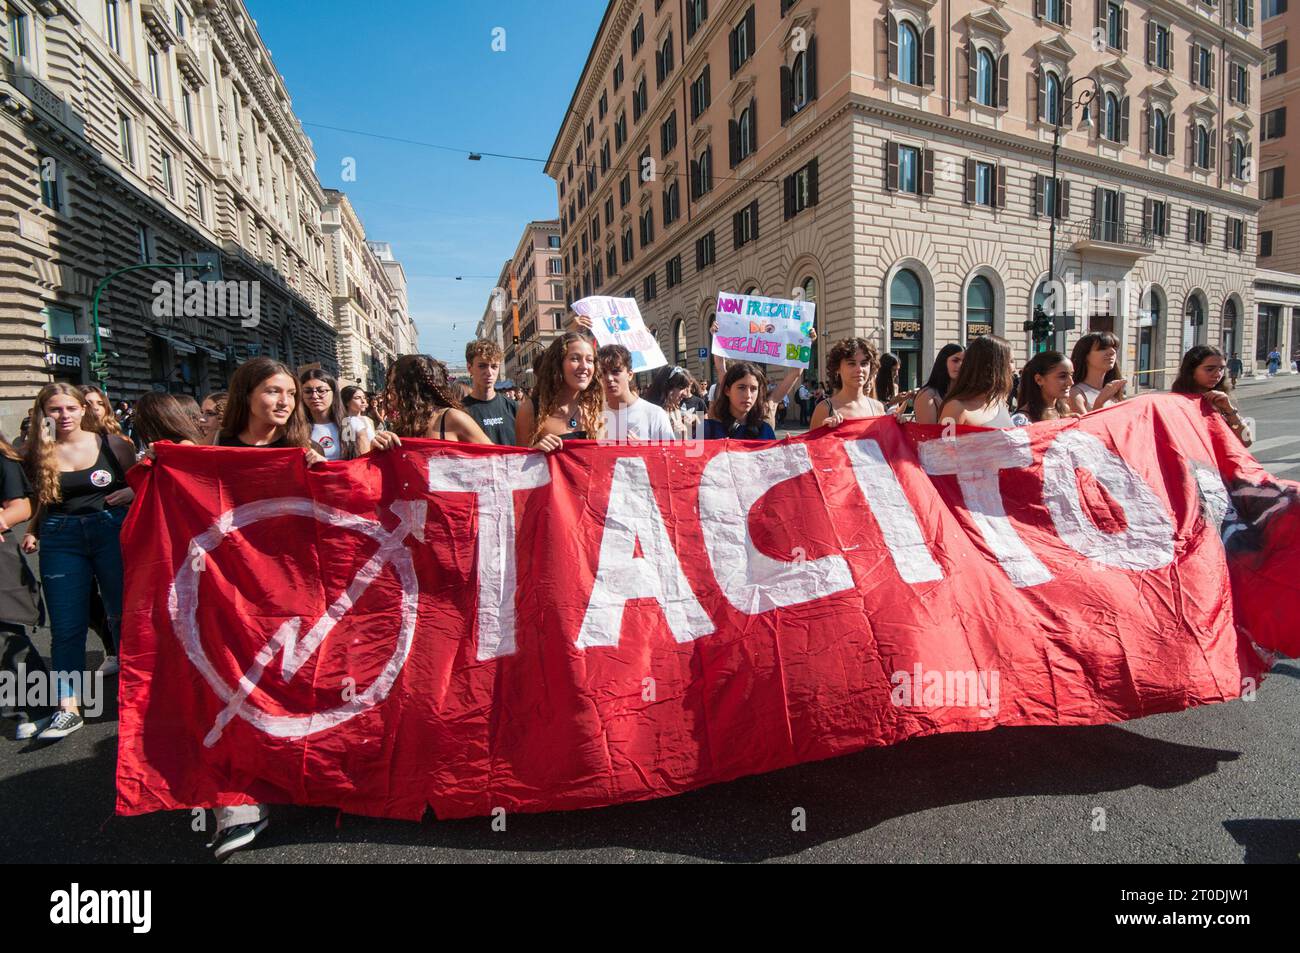 Rome, . 06th Oct, 2023. 06/10/2023Rome, Fridays for Future, young people in the streets for the environment Ps: the photo can be used respecting the context in which it was taken, and without defamatory intent of the decorum of the people represented. Credit: Independent Photo Agency/Alamy Live News Stock Photo